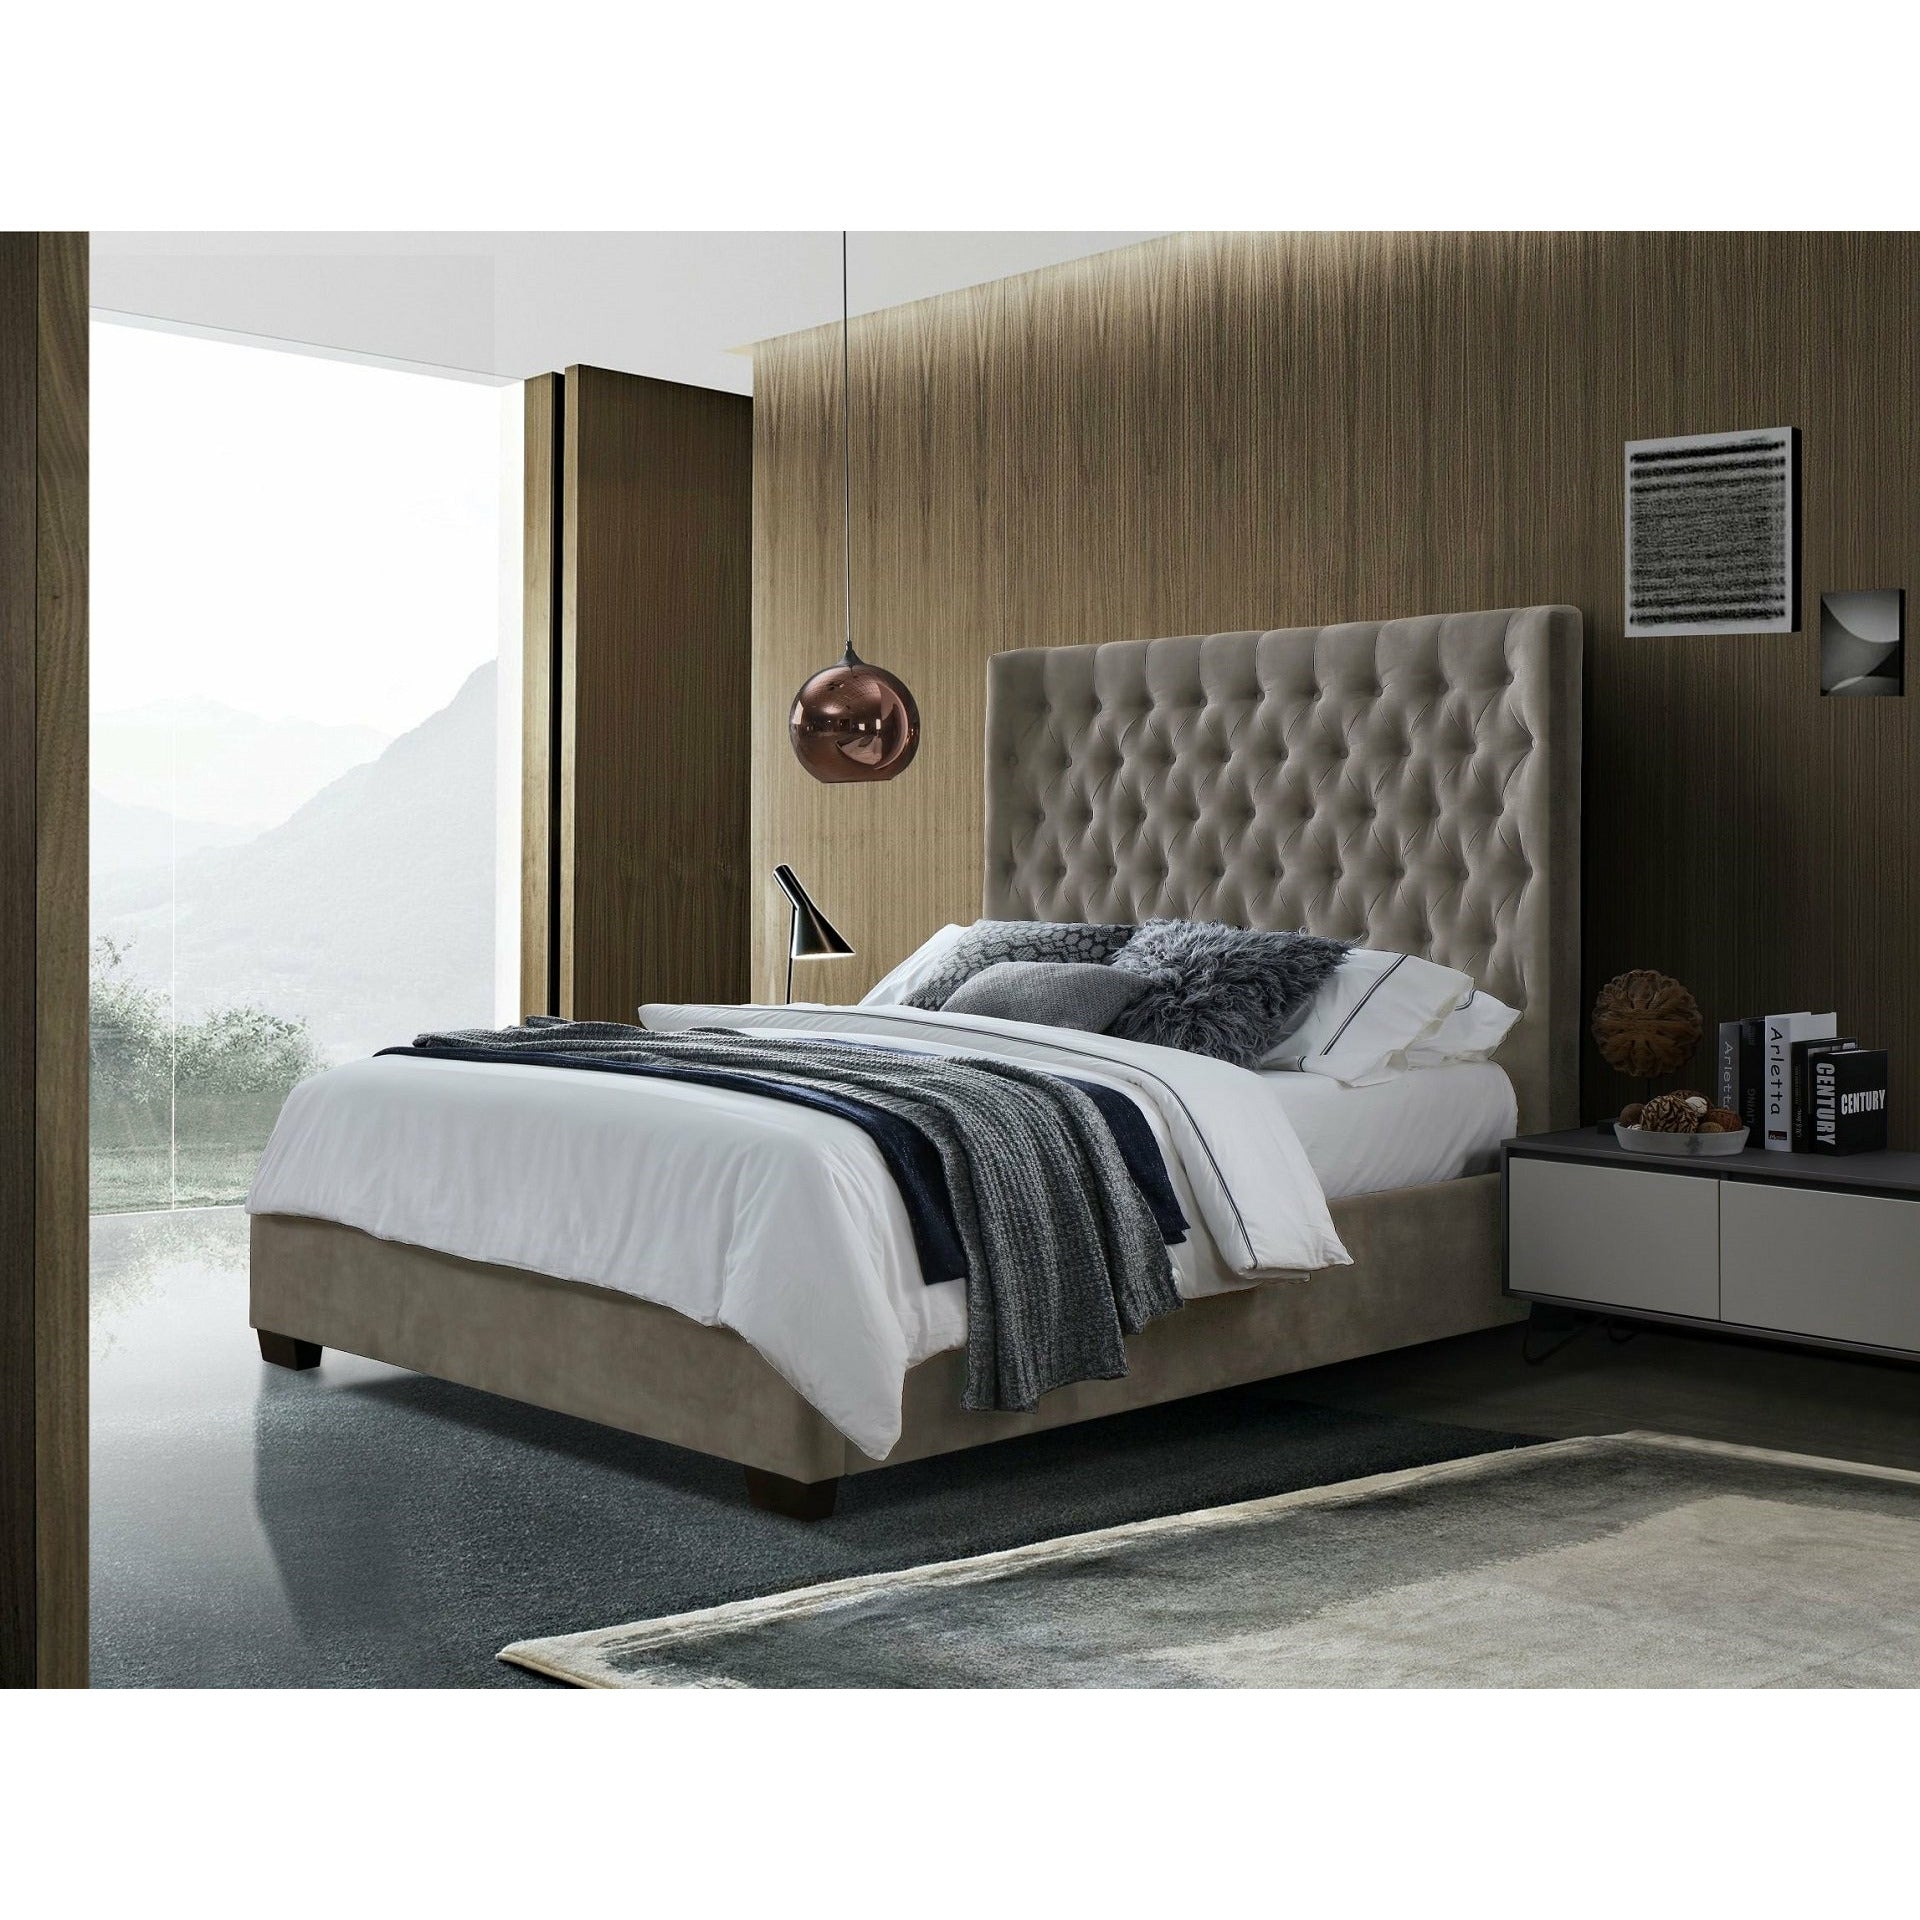 Augustin Upholstered Bed Frame - Taupe | soft taupe velvet fabric bedframe | sleigh bed | curved headboard